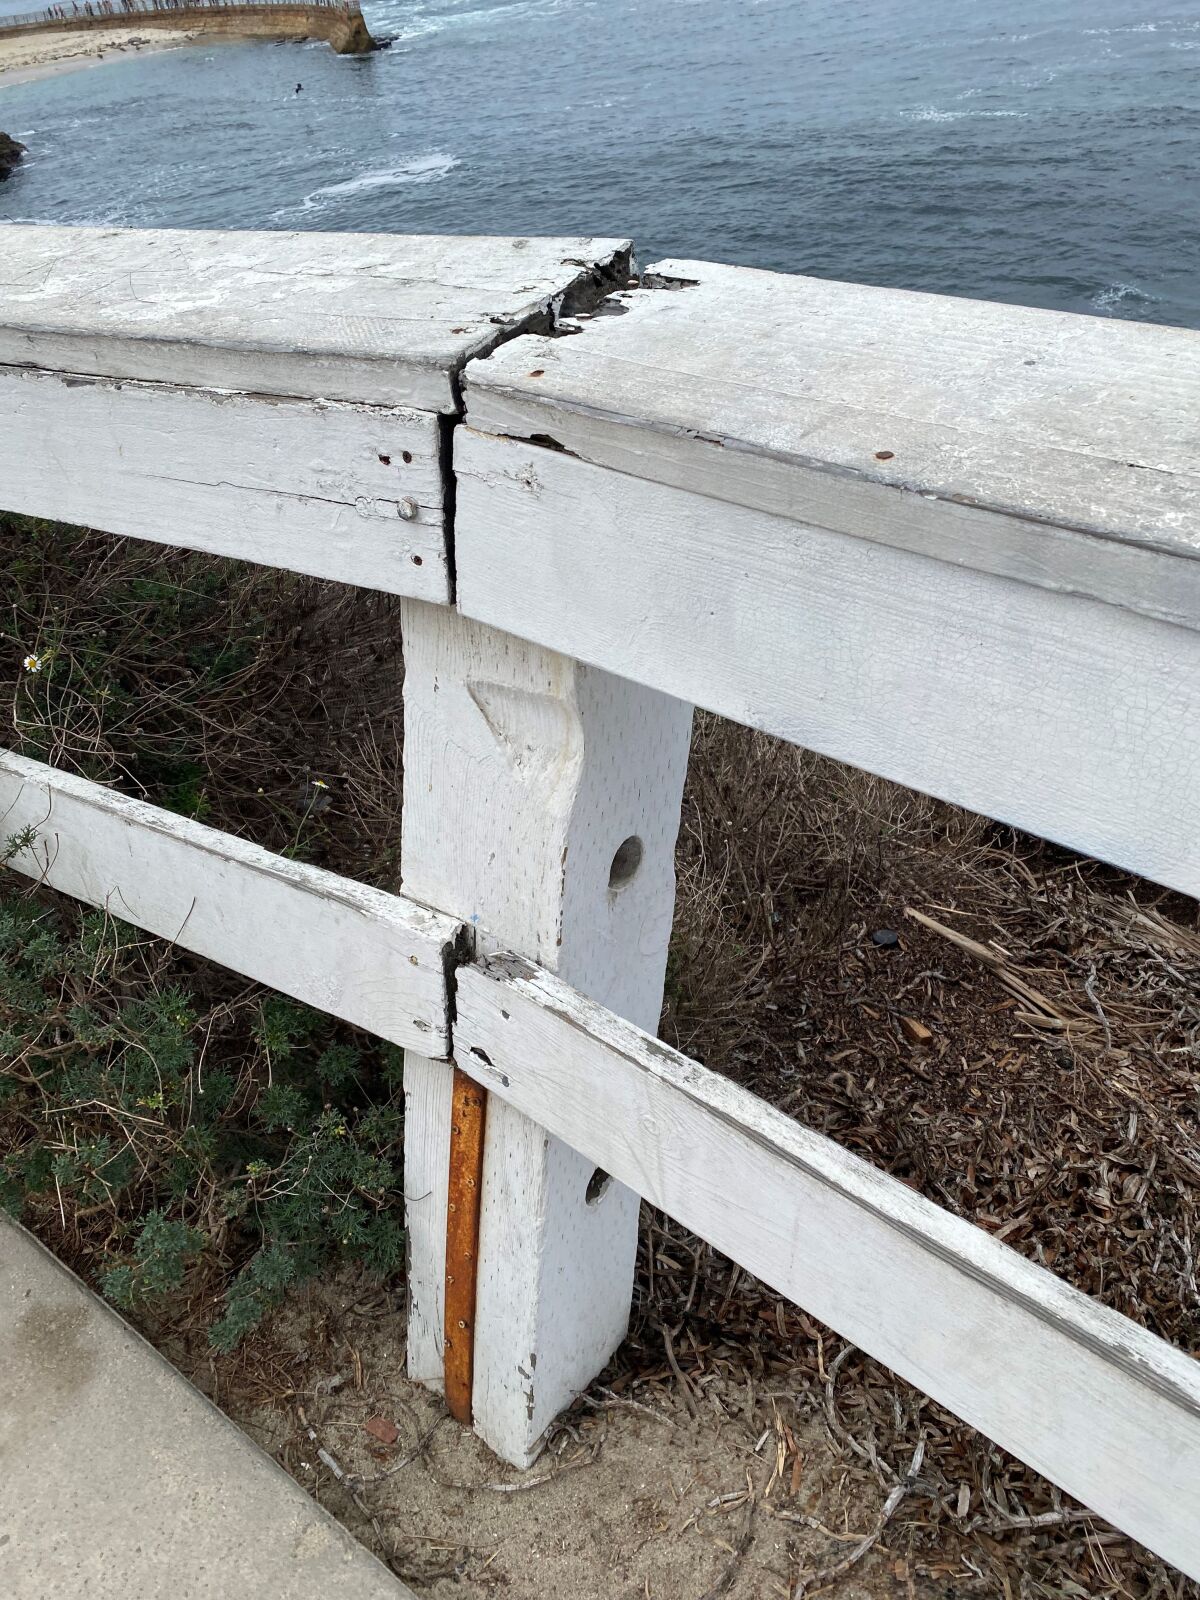 Some of the fences along La Jolla's shoreline toward the Children's Pool have some residents concerned about safety.